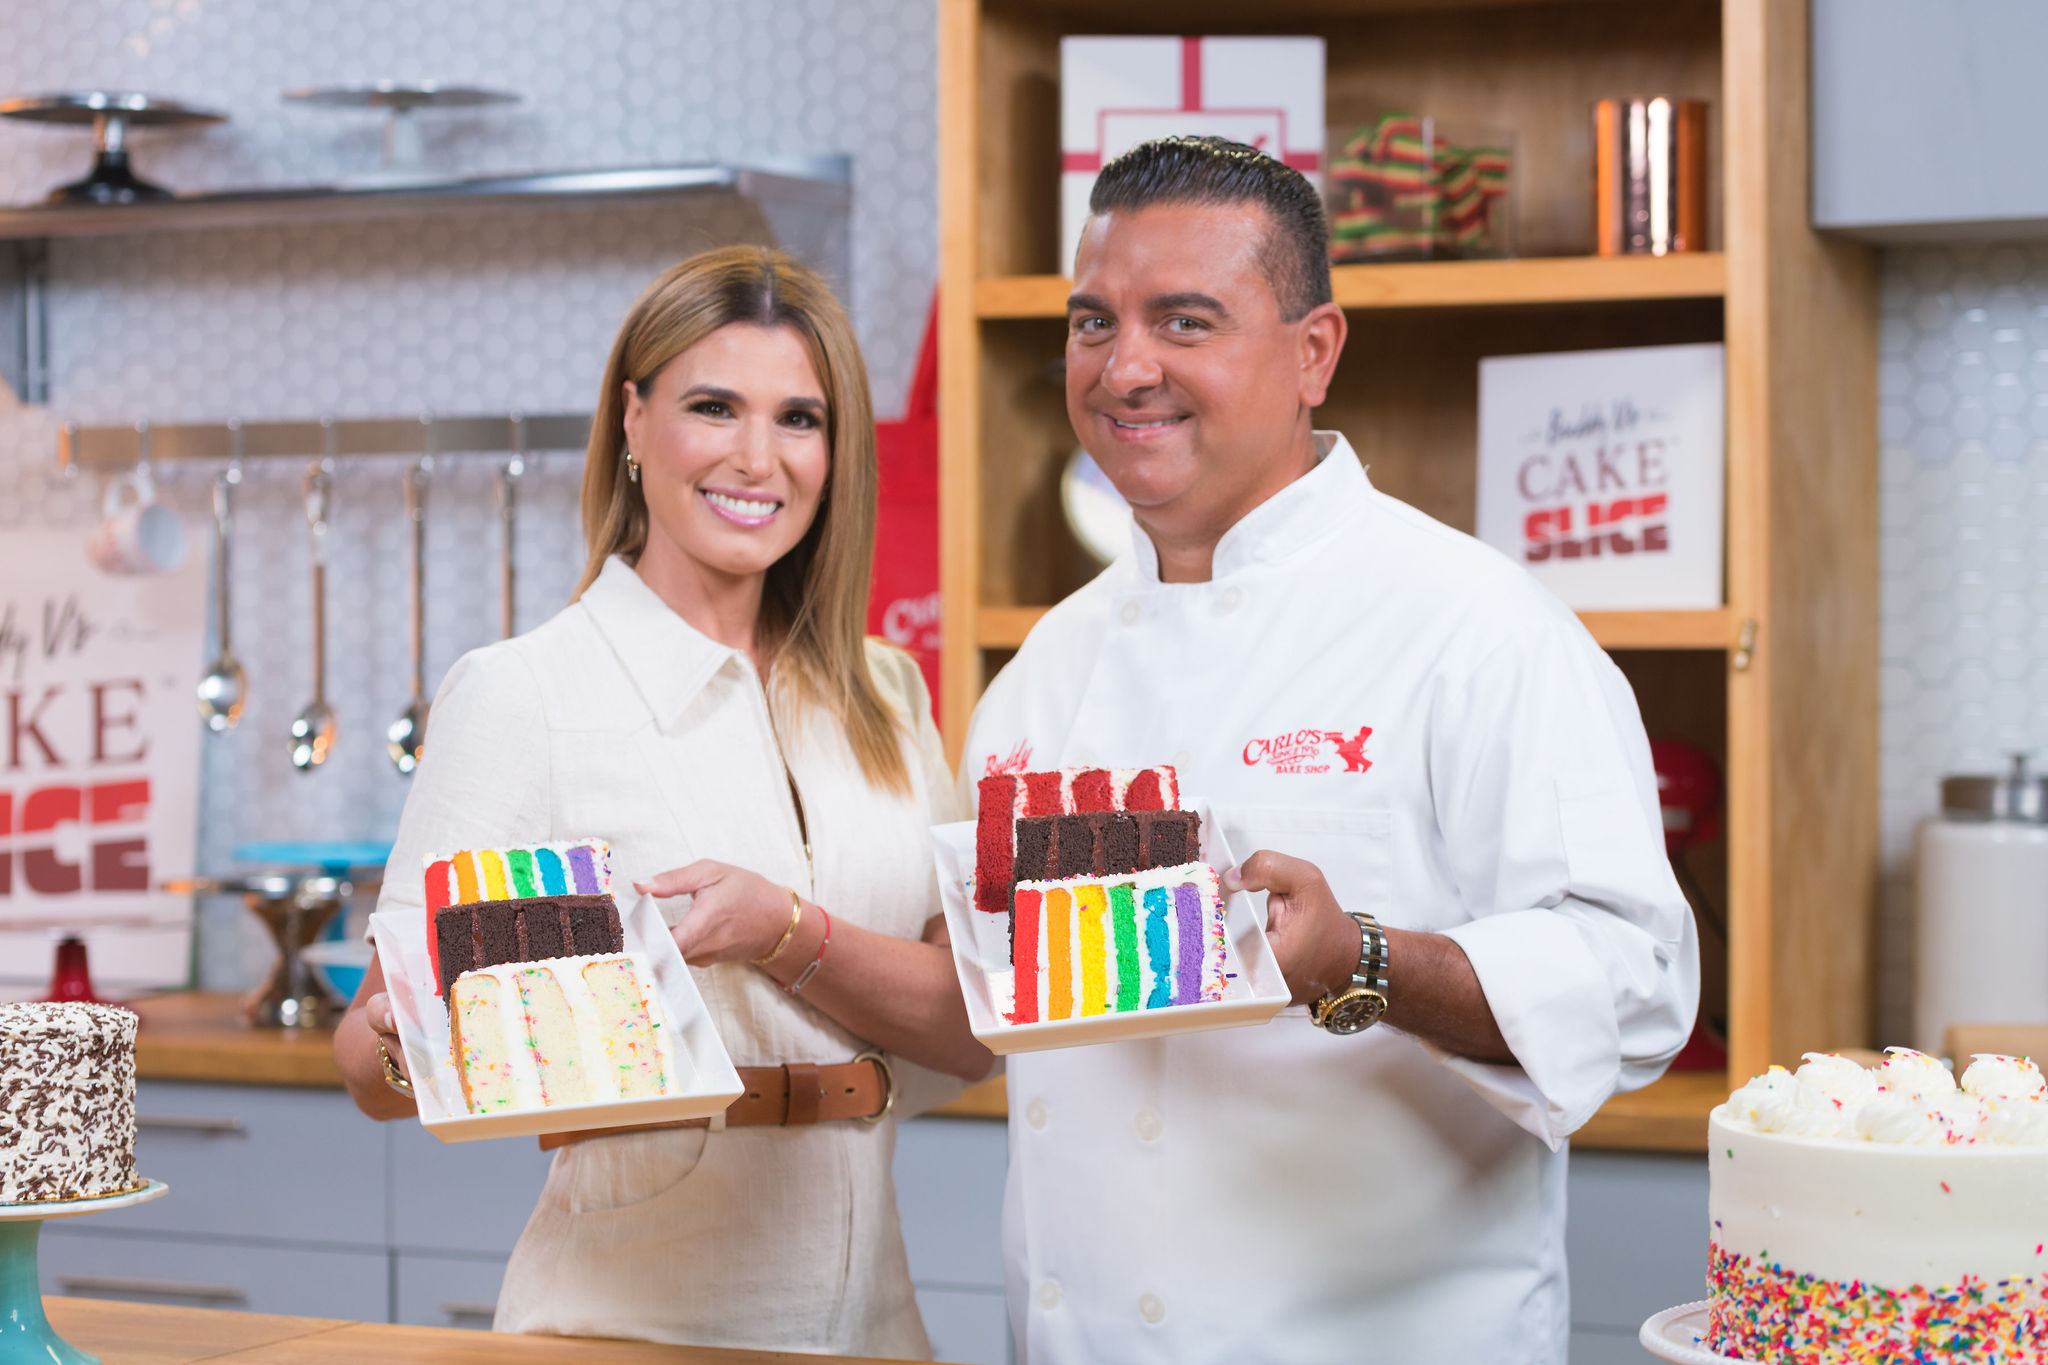 Cake Boss accident: Buddy Valastro's hand impaled by metal rod | 10tv.com